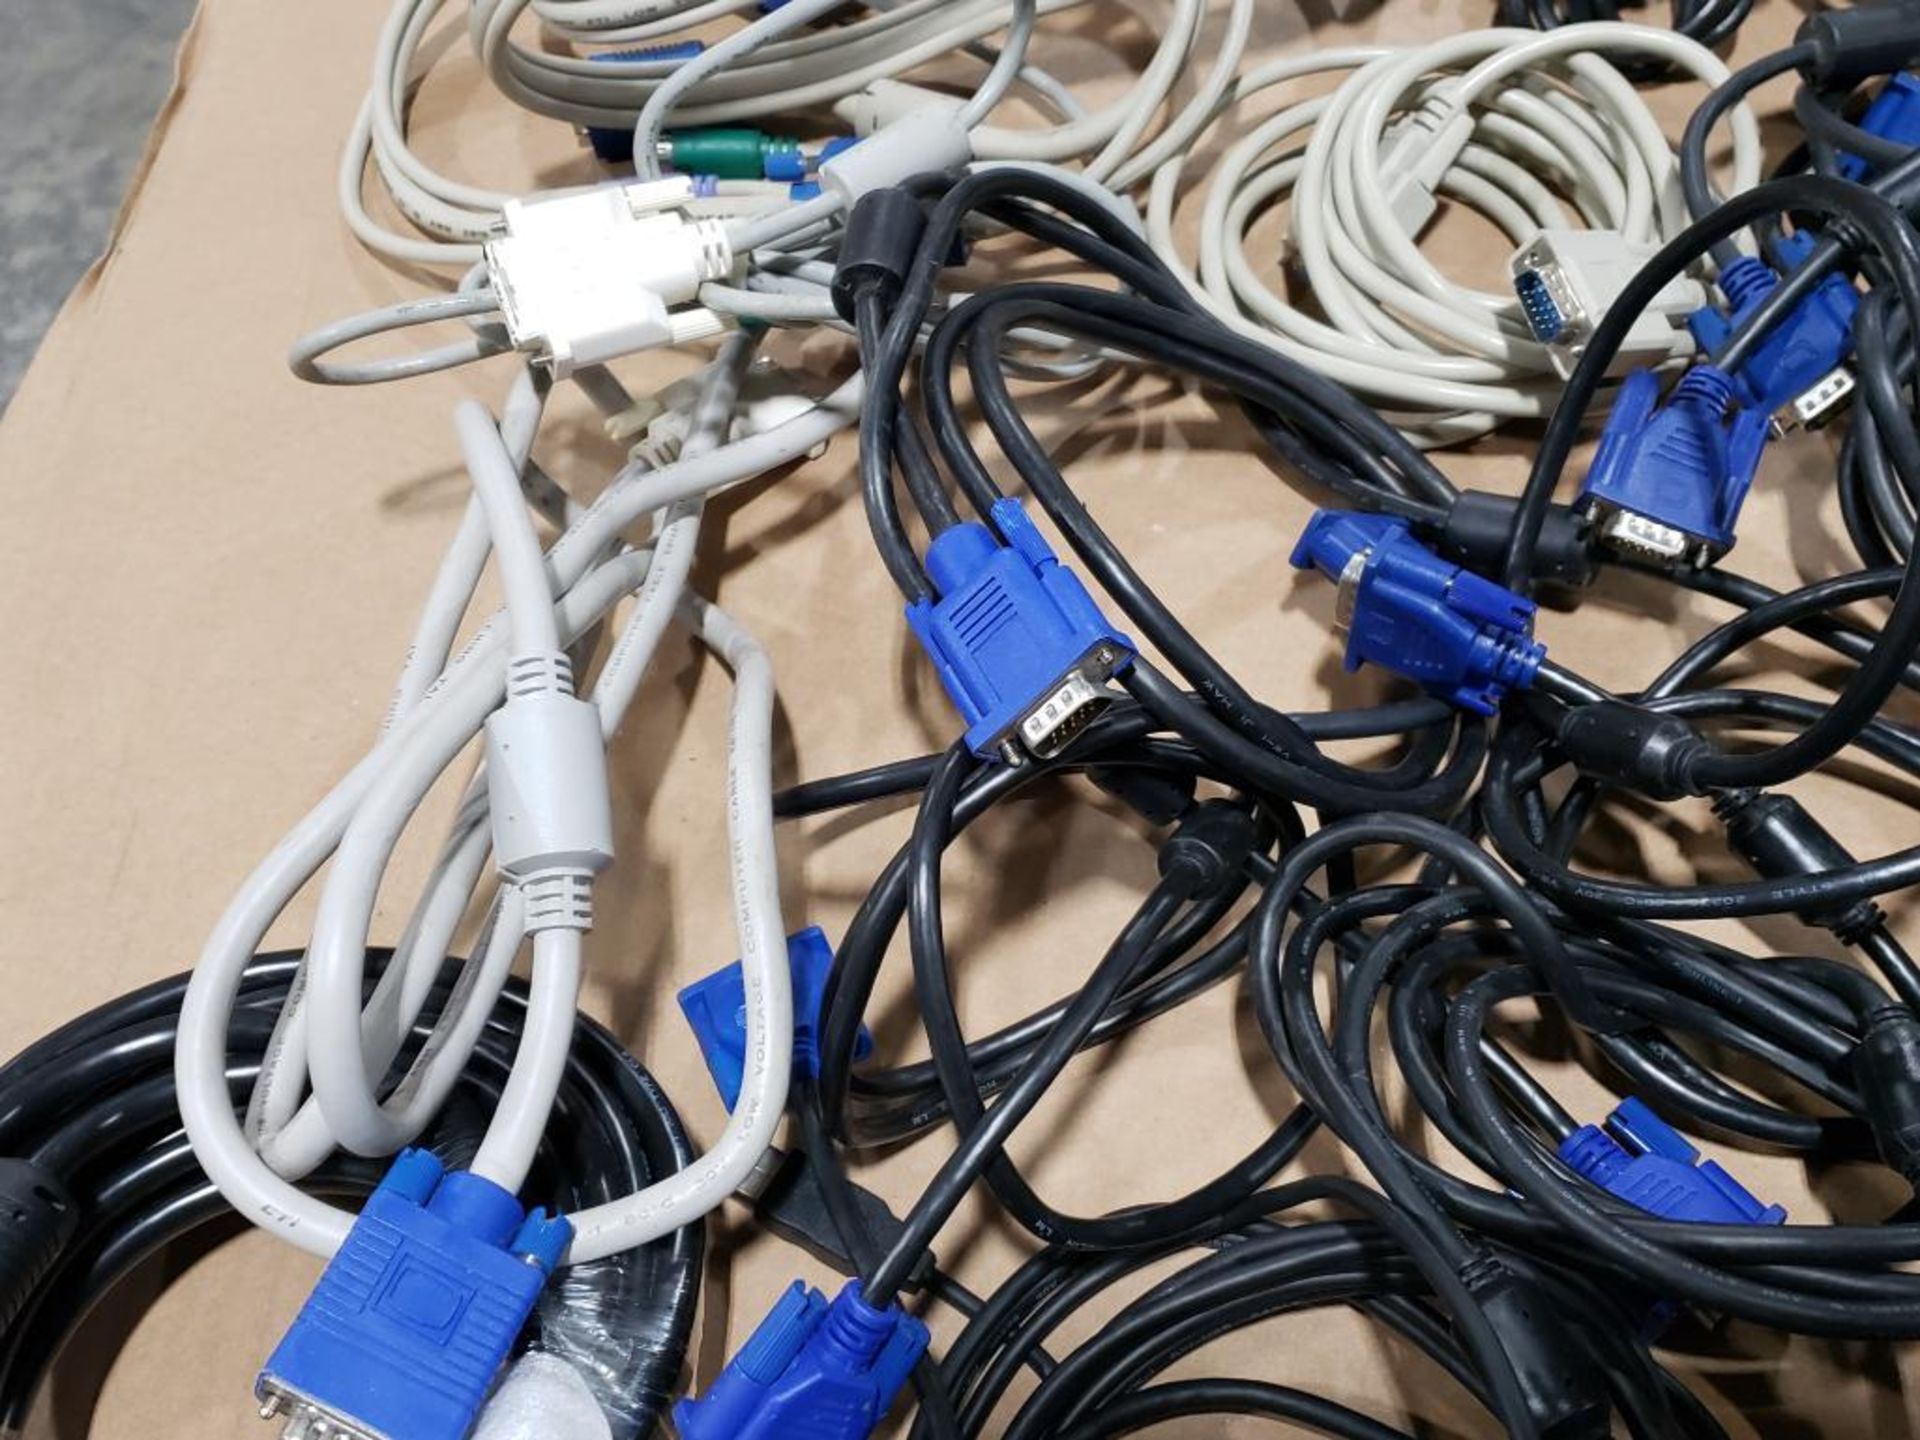 Large assortment of monitor cords. - Image 5 of 10